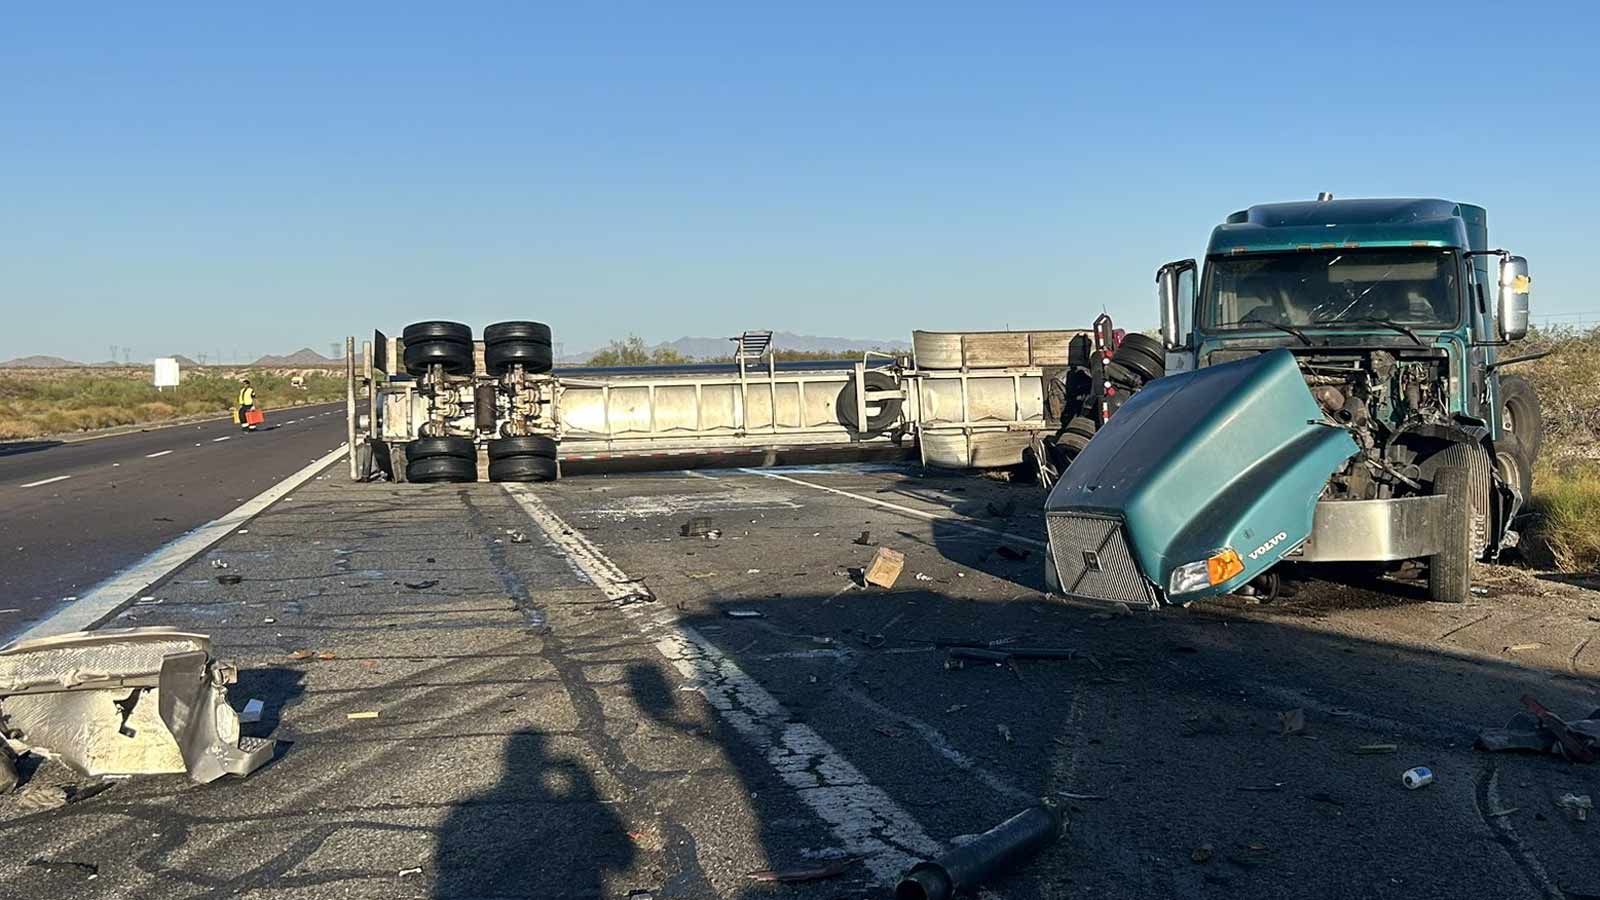 One person was killed Wednesday in a collision involving two semi-trucks on Interstate 10 in the fa...